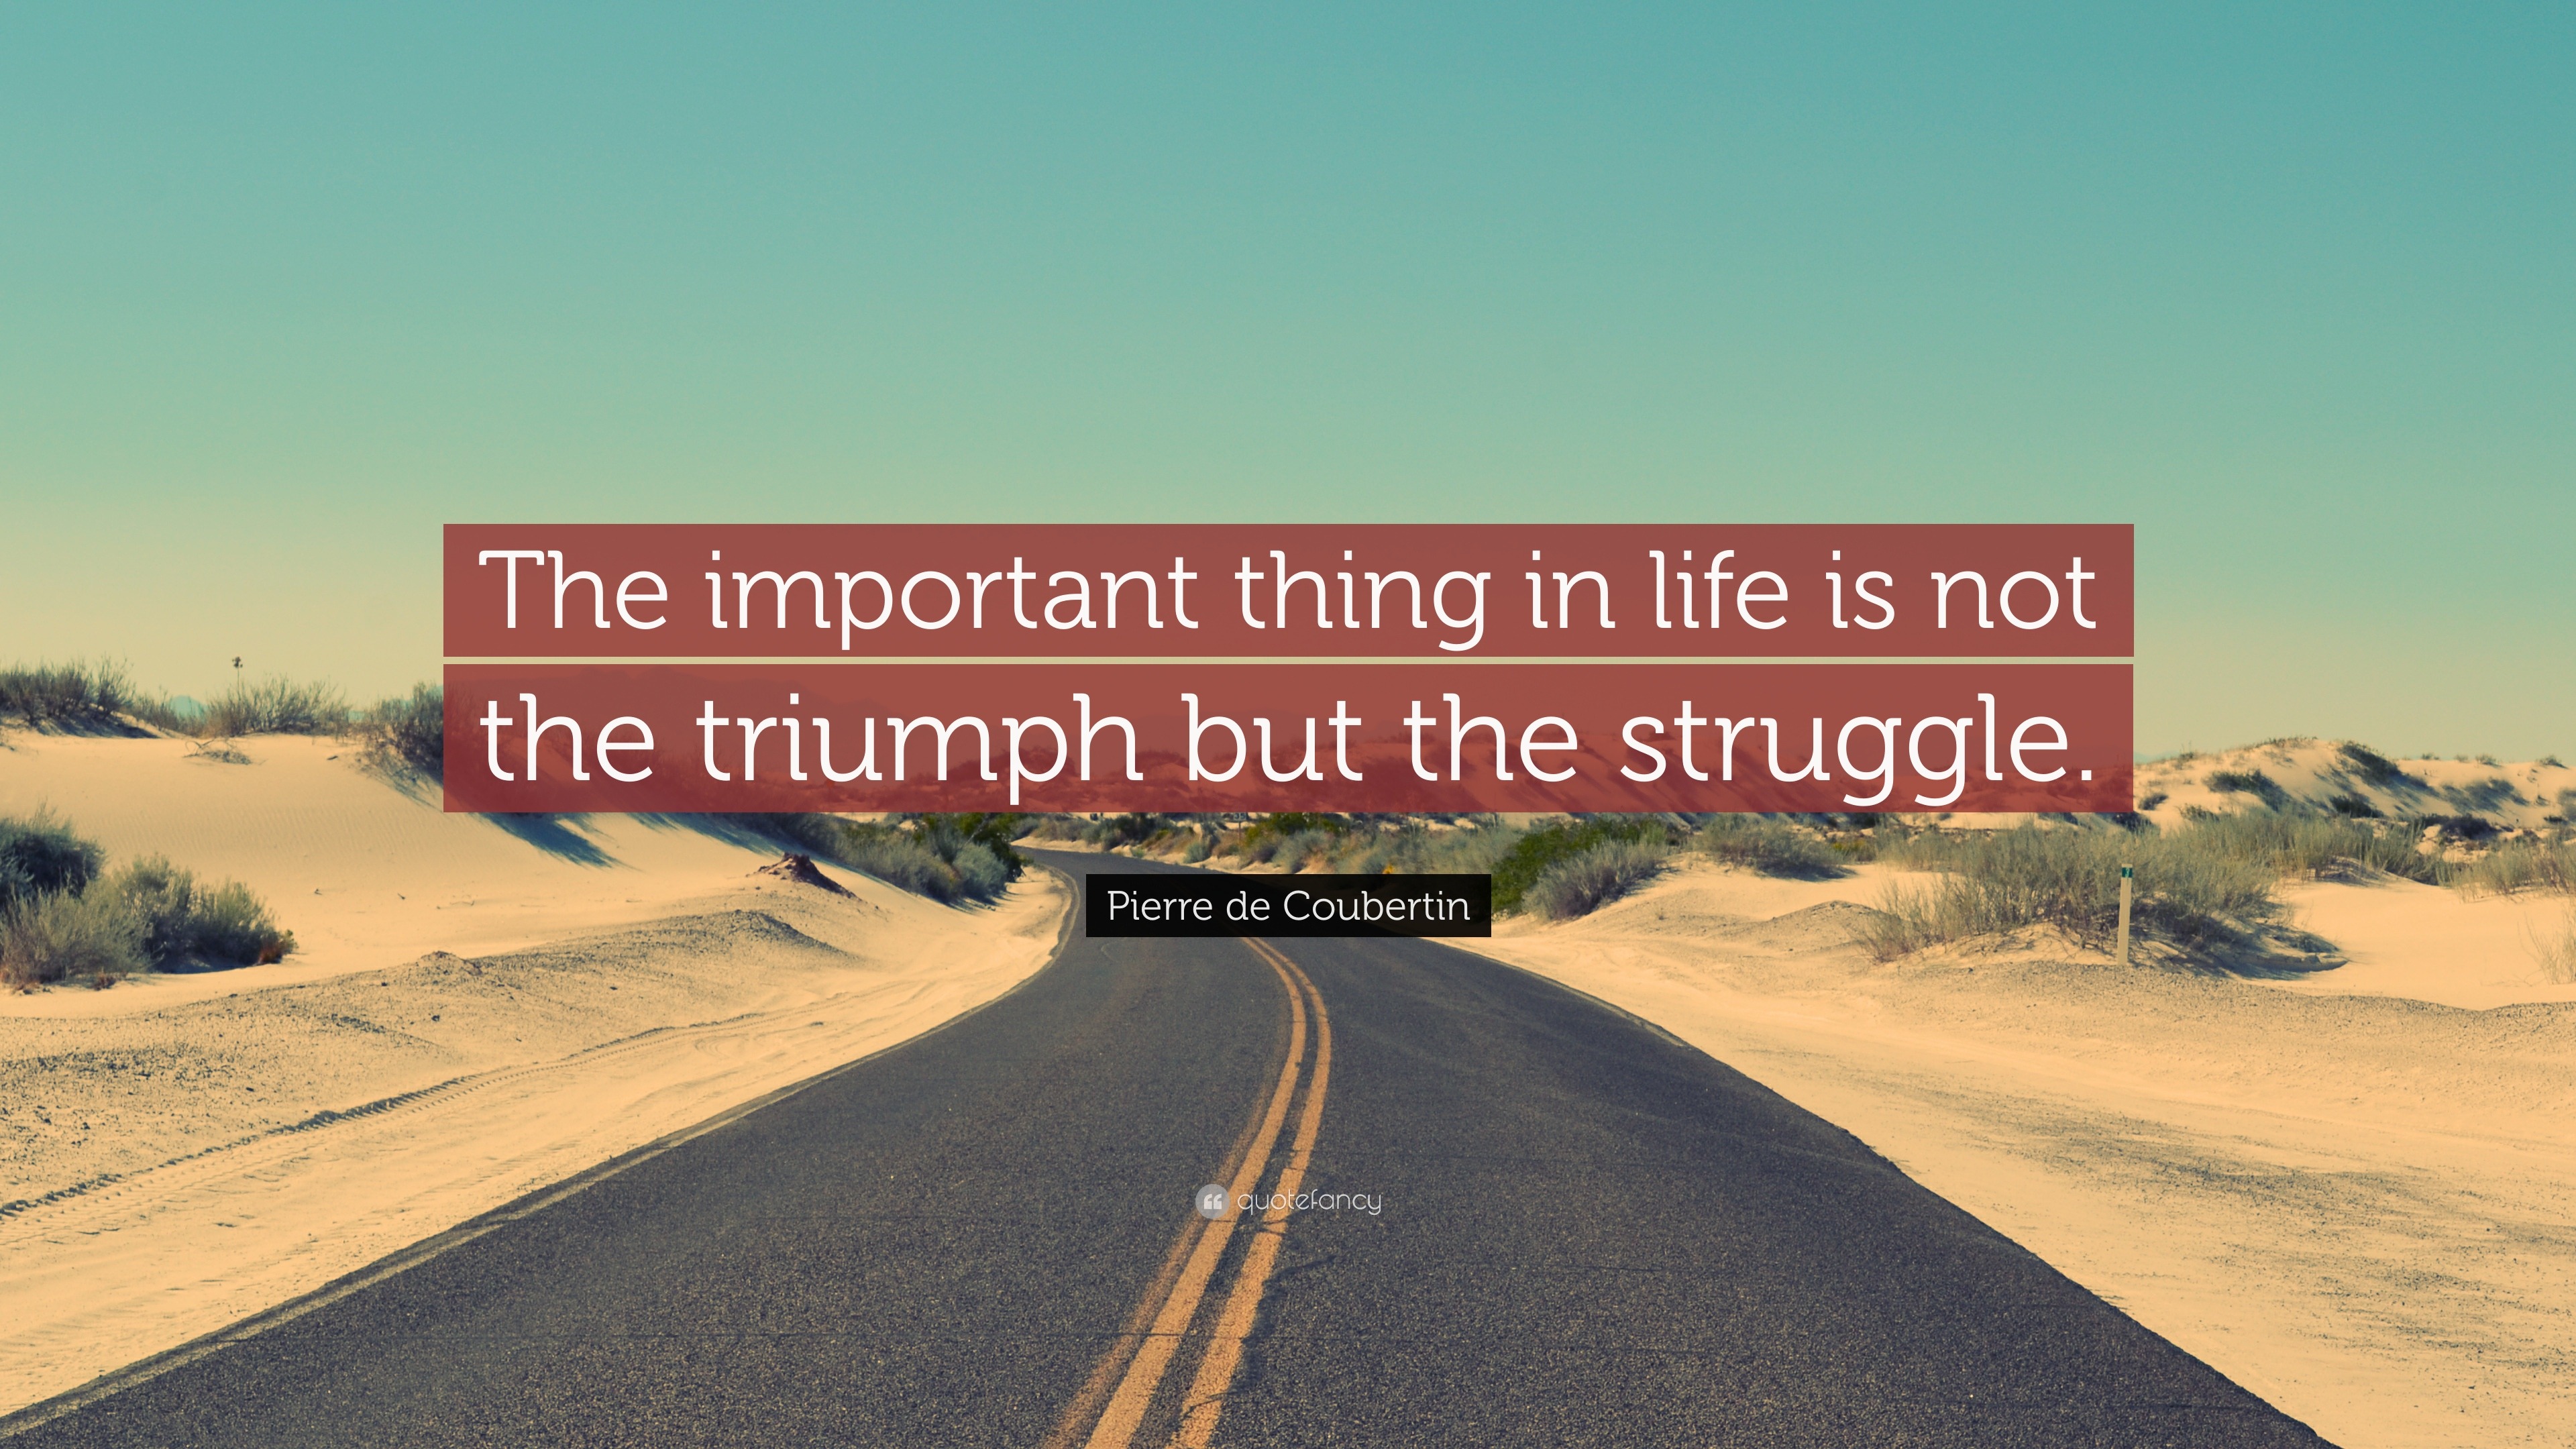 Pierre de Coubertin Quote “The important thing in life is not the triumph but